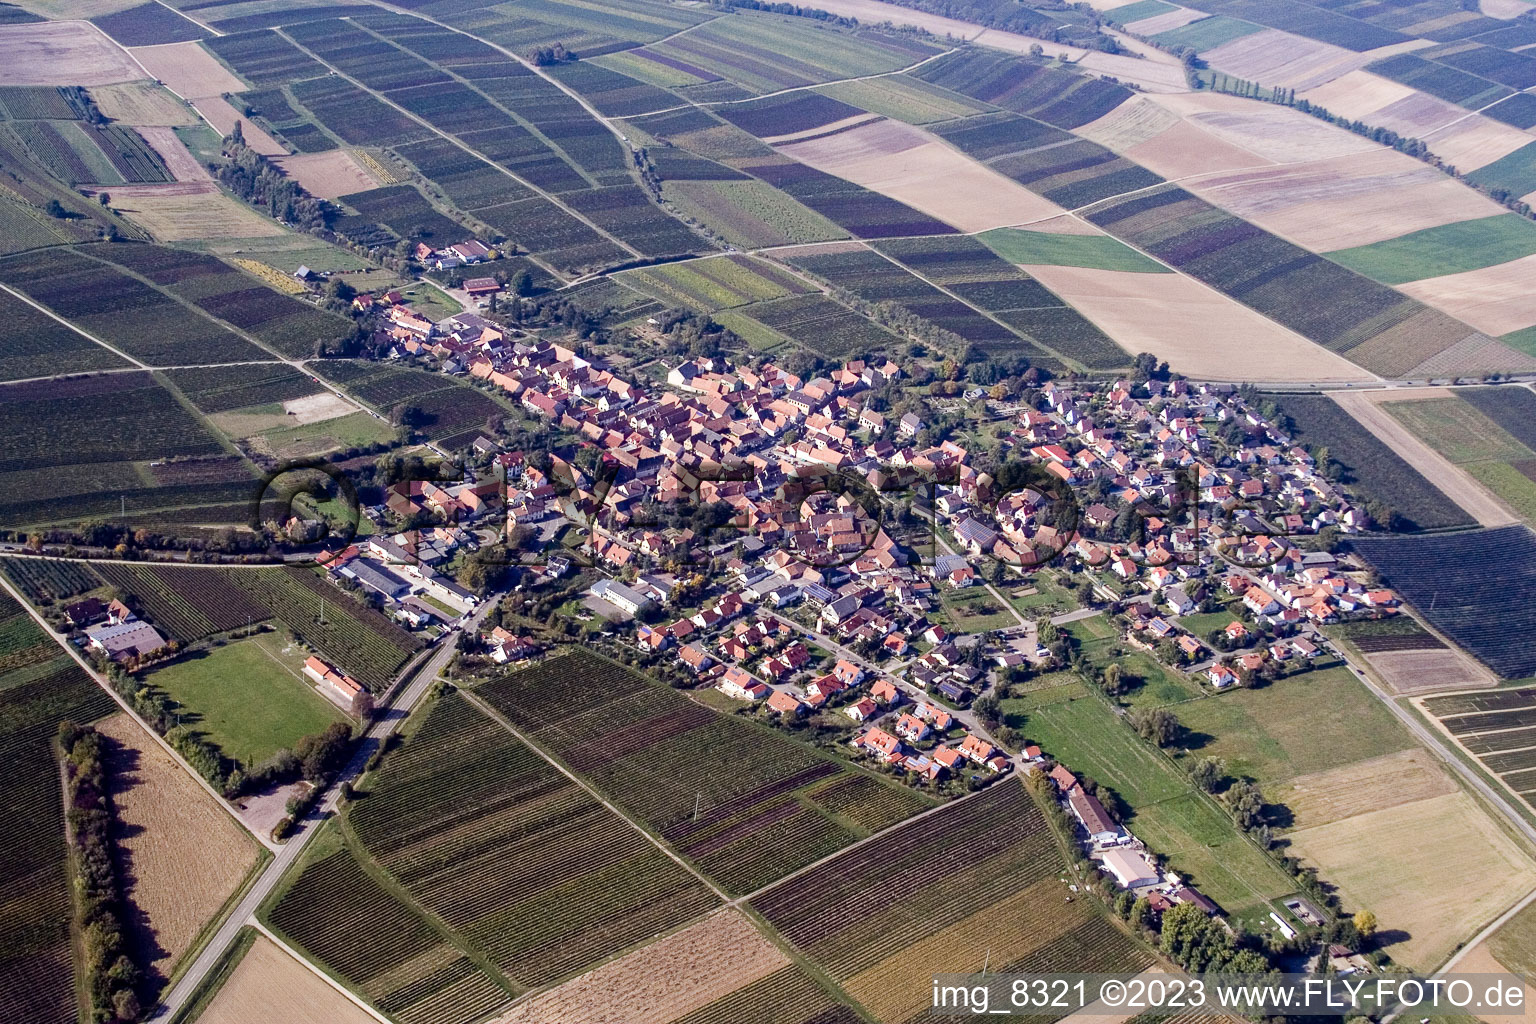 Aerial view of From the southeast in Impflingen in the state Rhineland-Palatinate, Germany